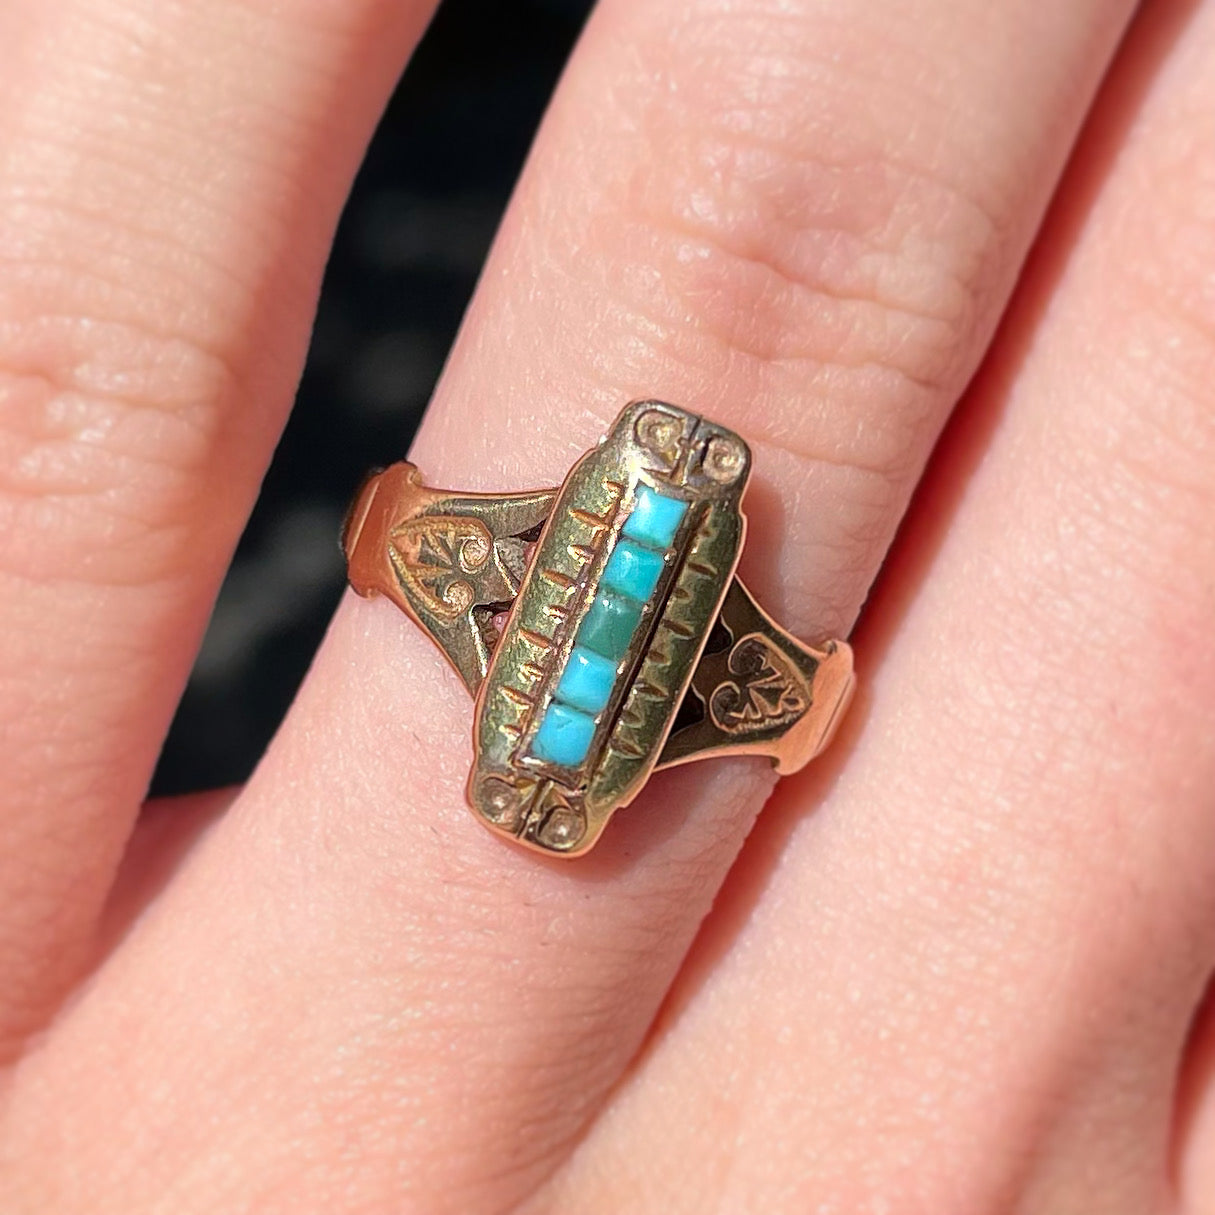 Antique yellow gold ring set with five square turquoise stones, circa 1920's.